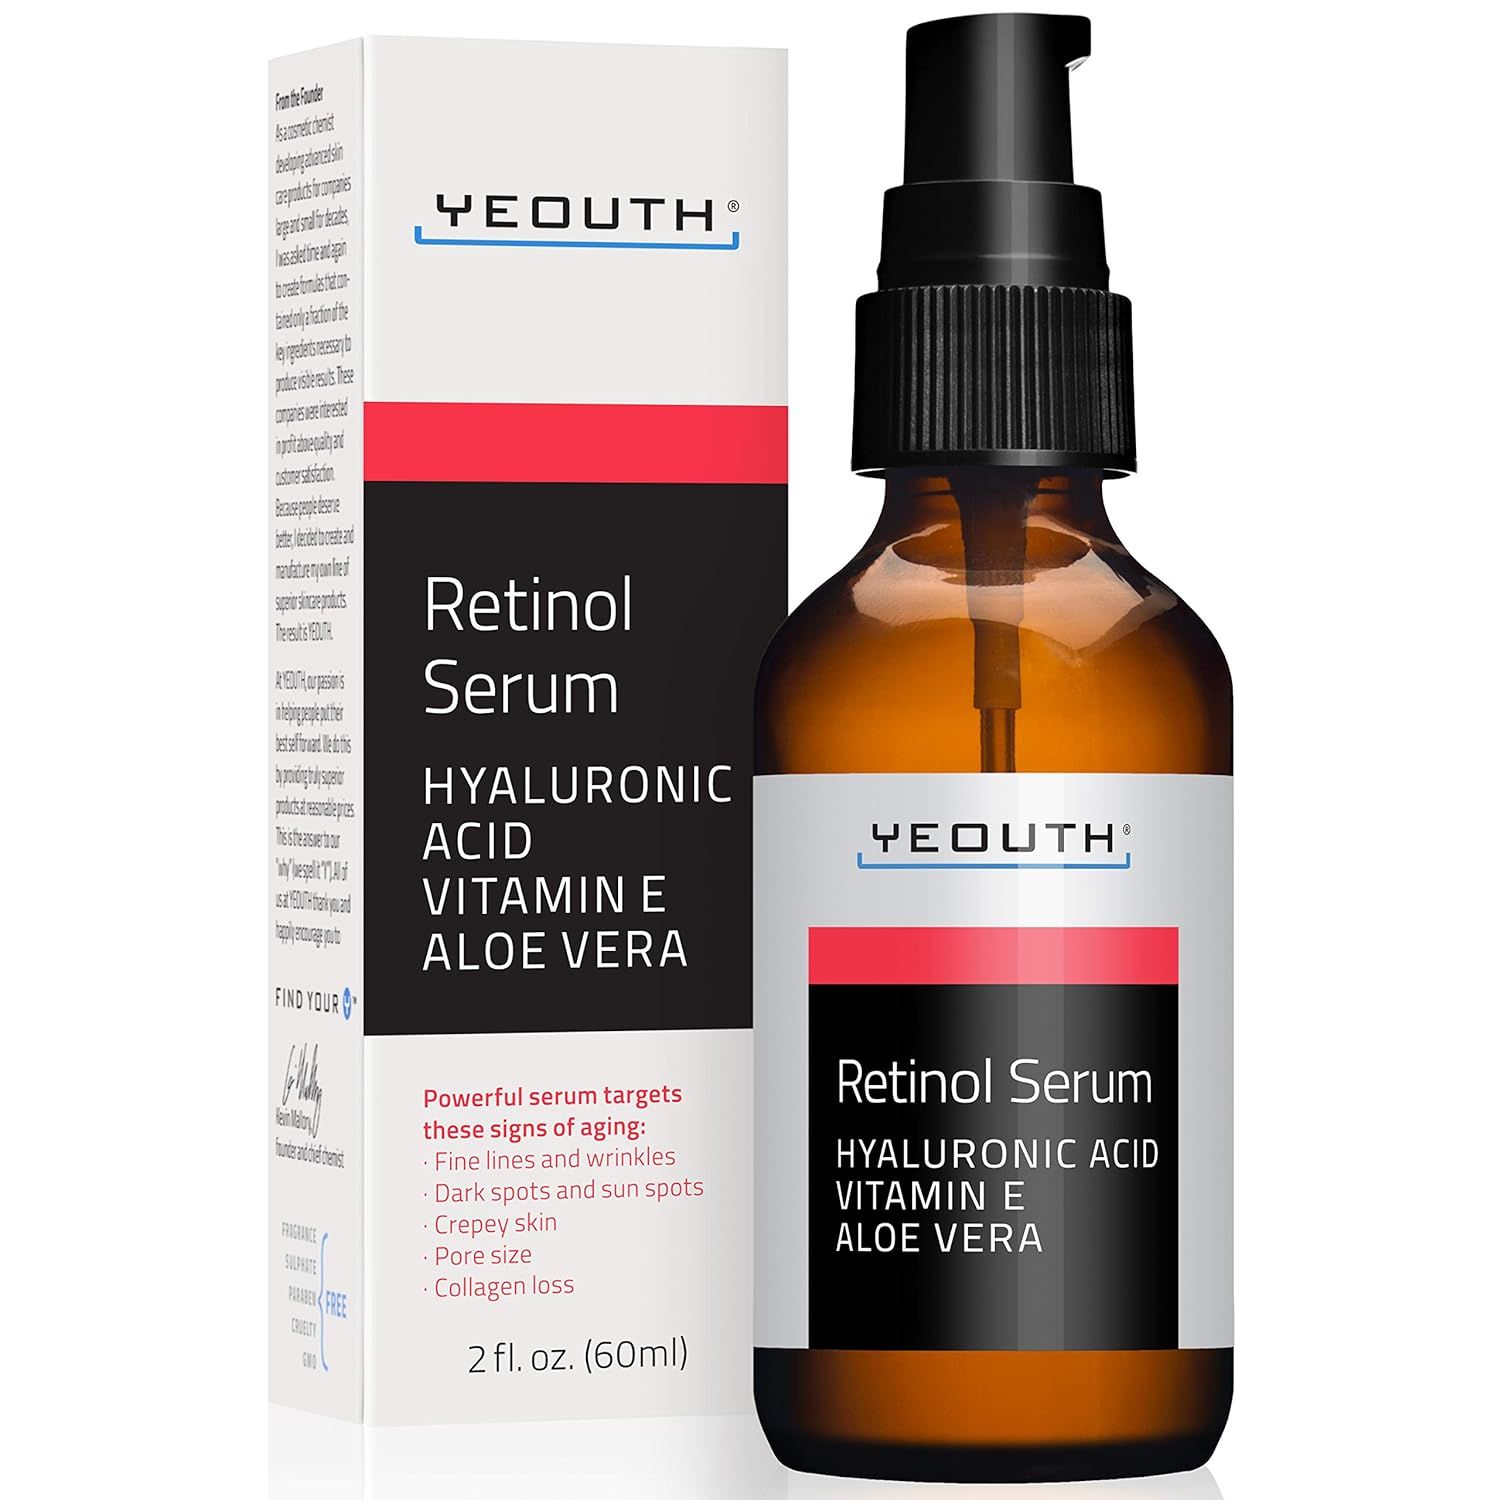 YEOUTH Retinol Serum for Face with Hyaluronic Acid Serum, Hydrating Face Serum, Facial Serum for ... | Amazon (US)